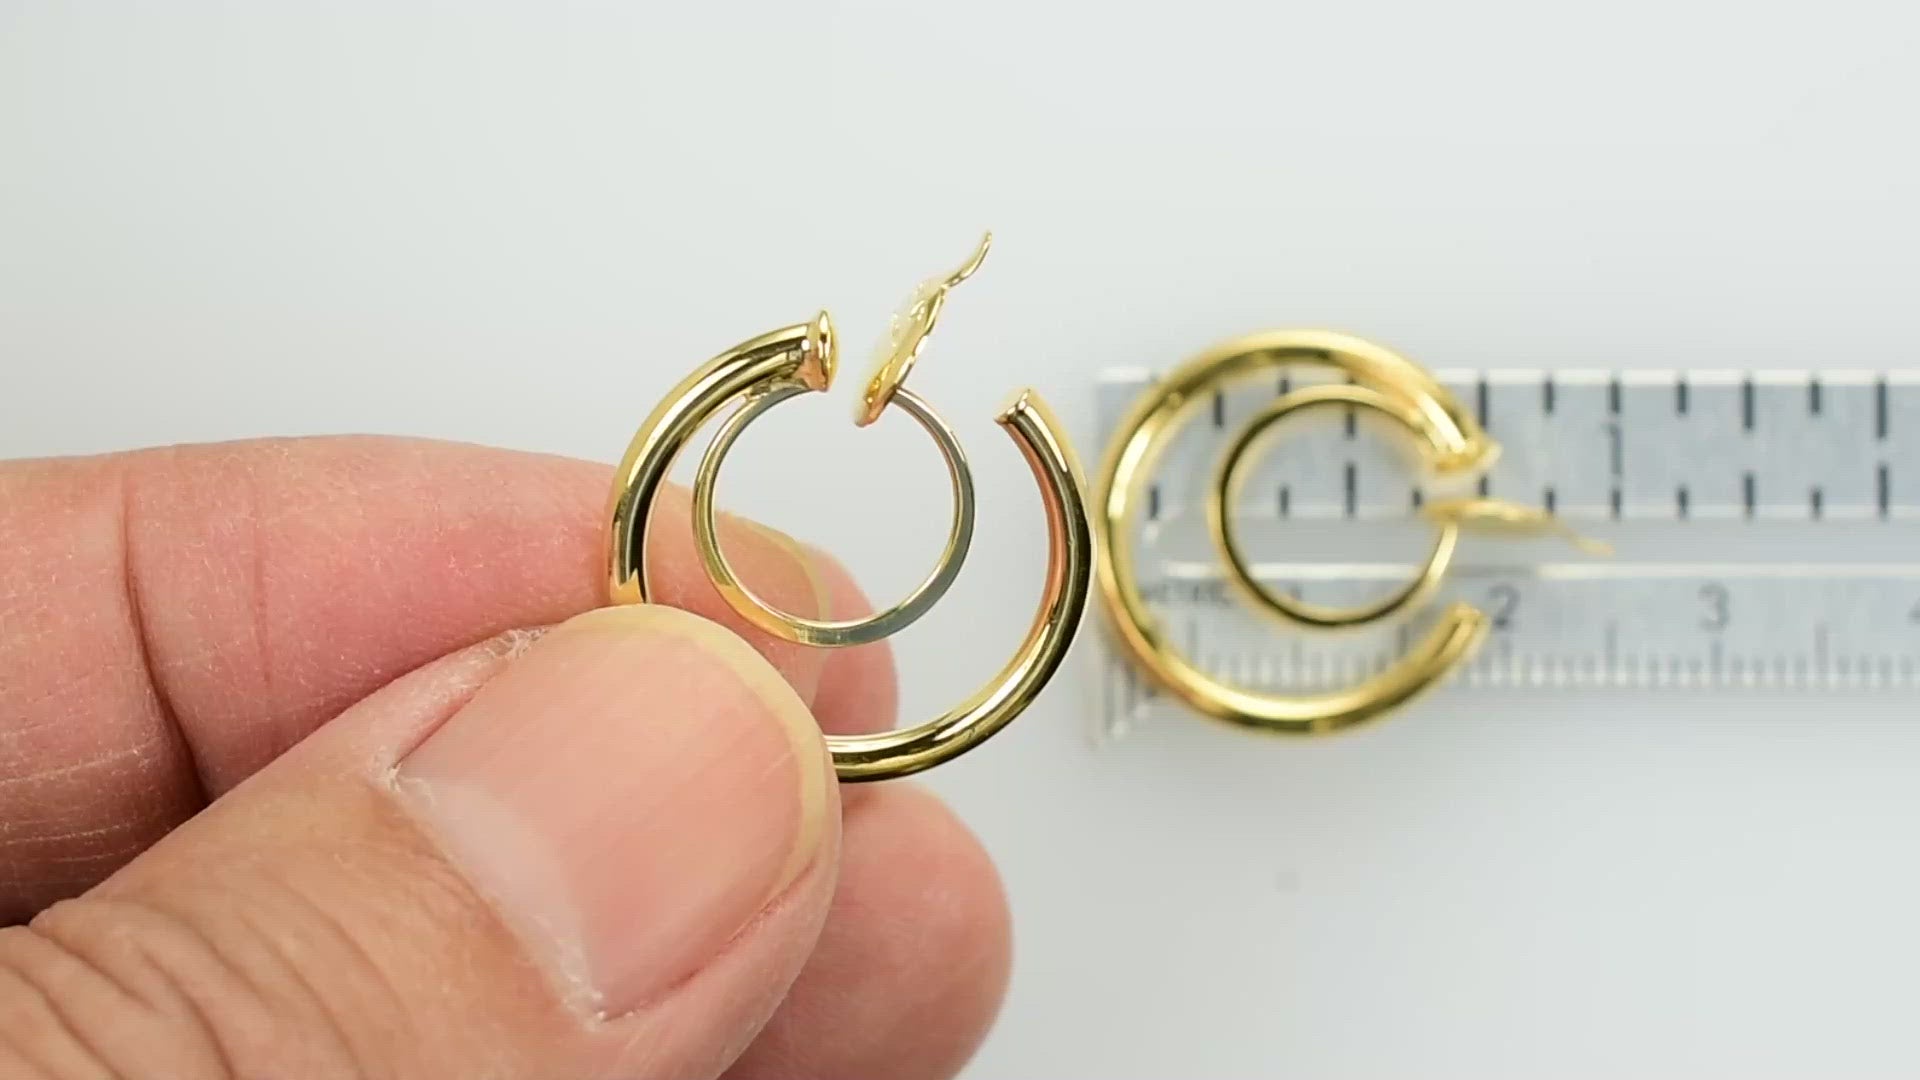 14k Yellow Gold Non Pierced Clip On Round Double Hoop Earrings 19mm x 2mm